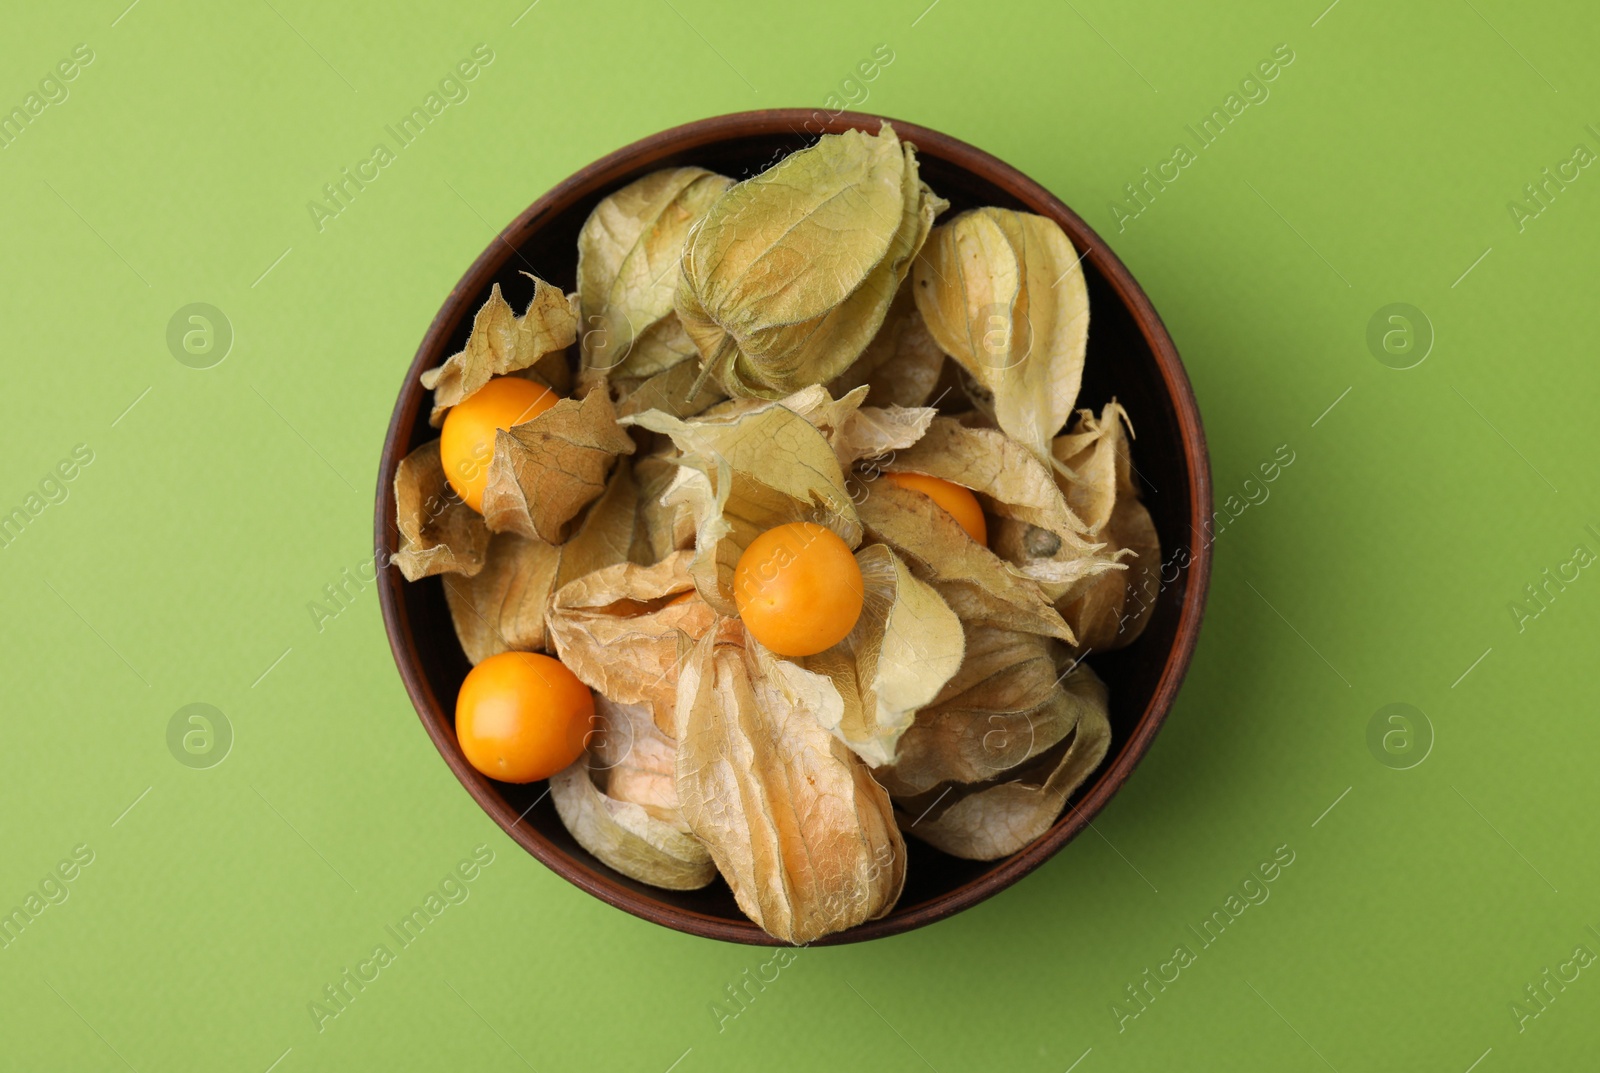 Photo of Ripe physalis fruits with calyxes in bowl on green background, top view